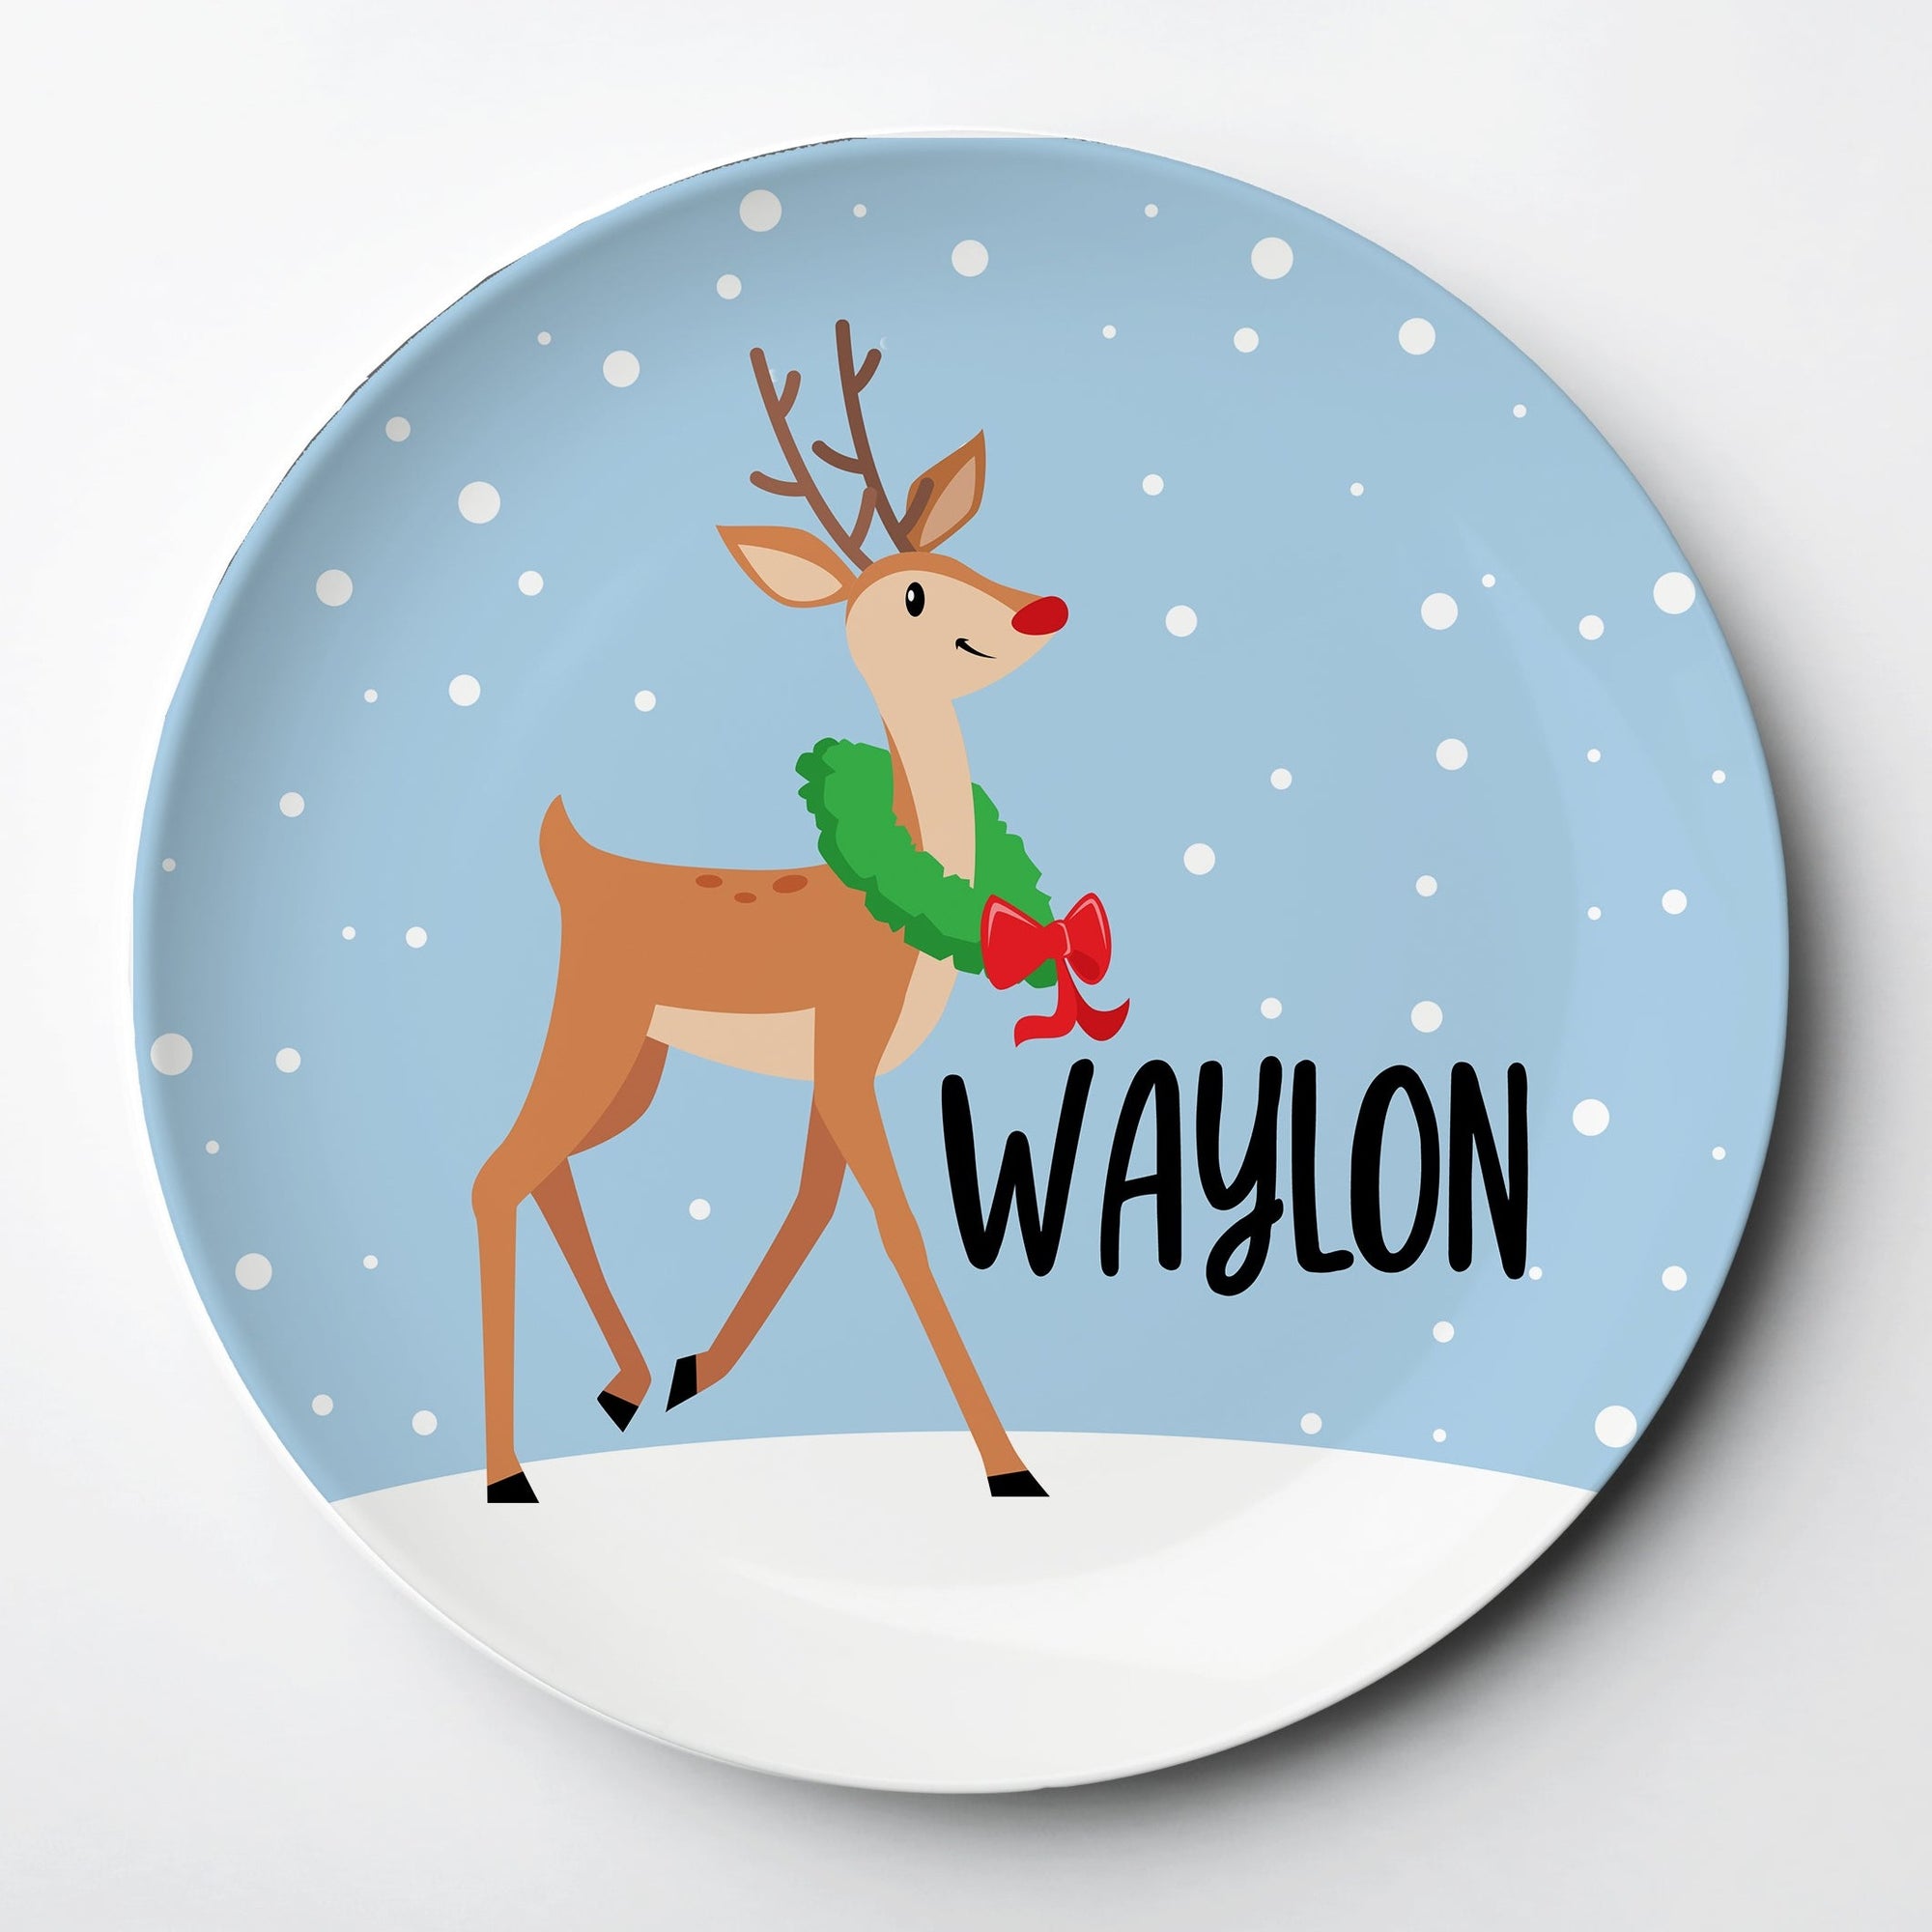 Reindeer Christmas Plate - Personalized with your child's name. Made of thick polymer plastic that will last for years. Dishwasher and microwave safe